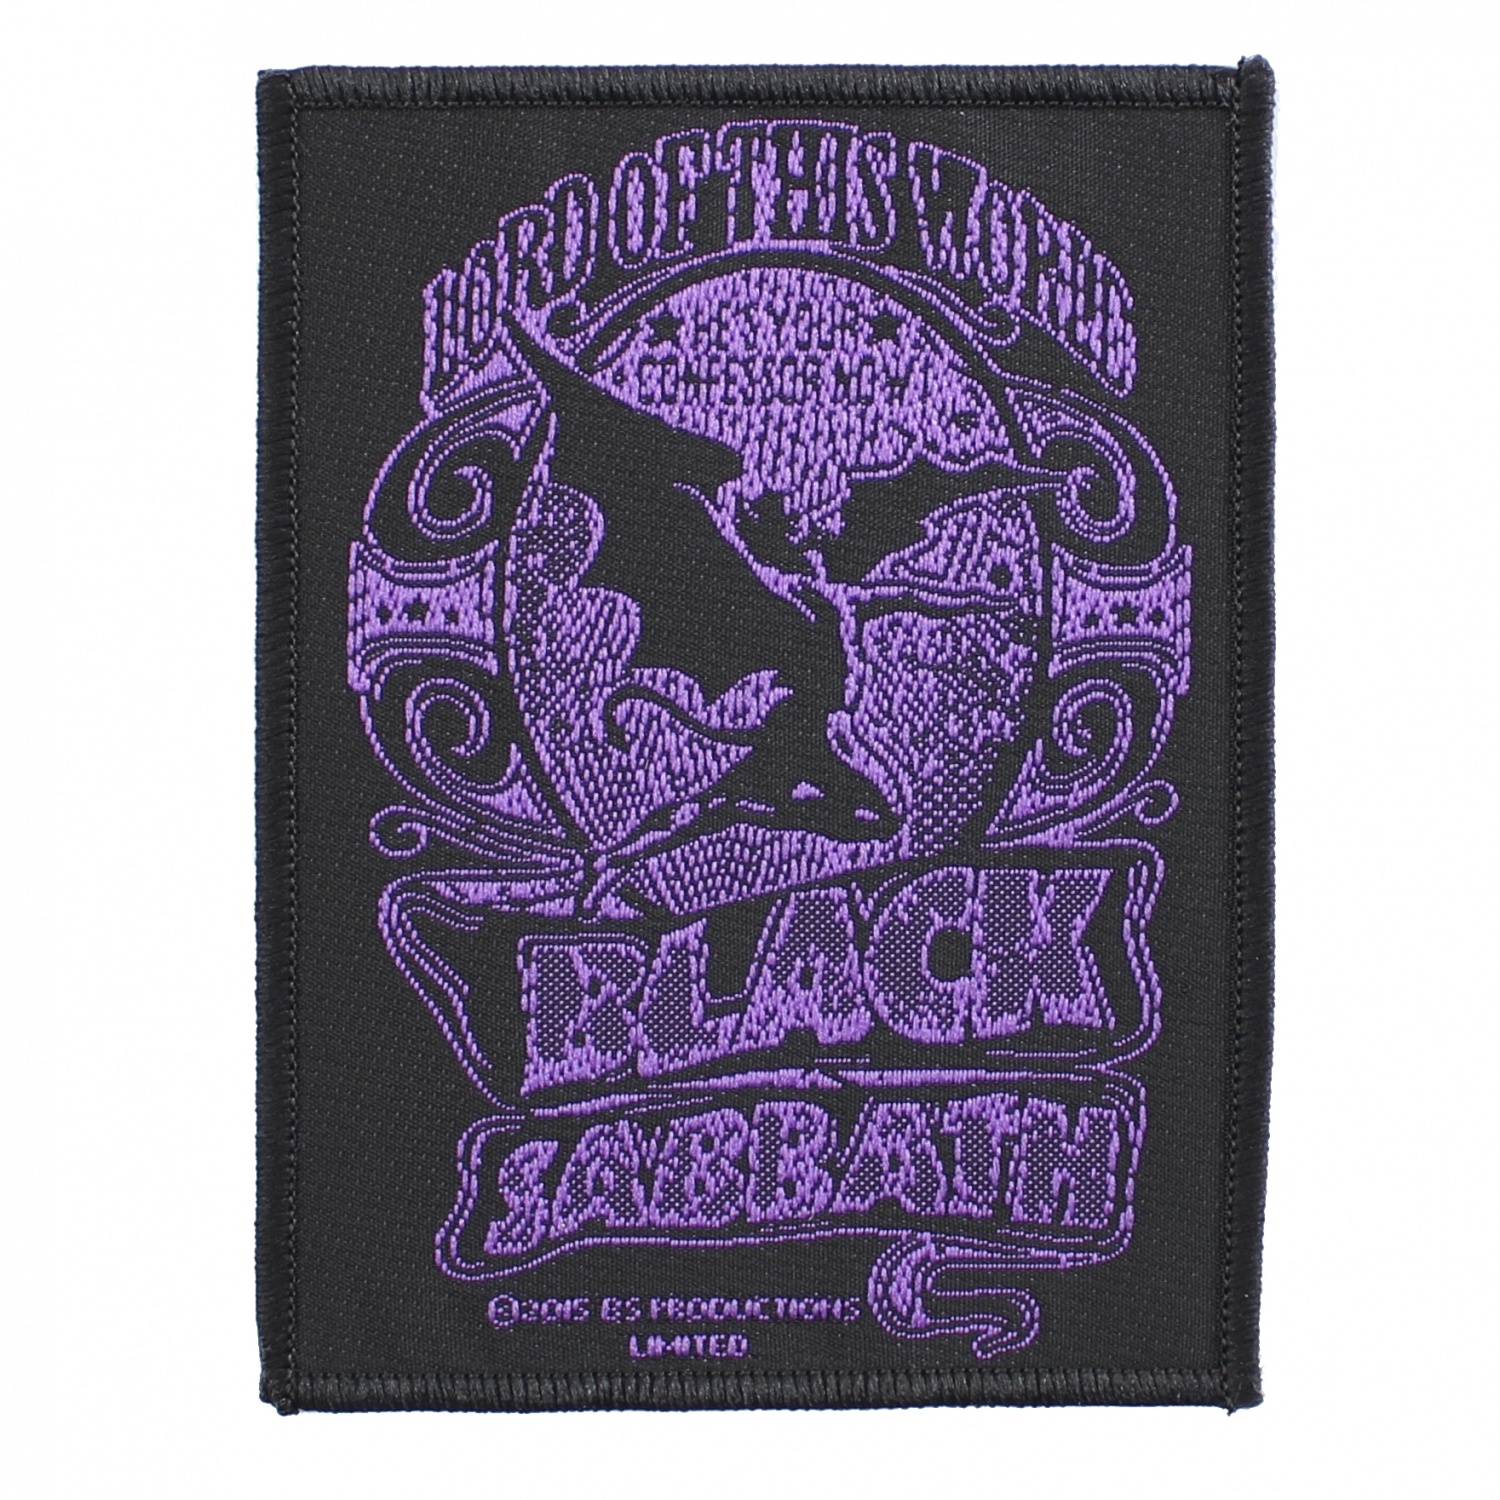 Black Sabbath Lord of This World Patch